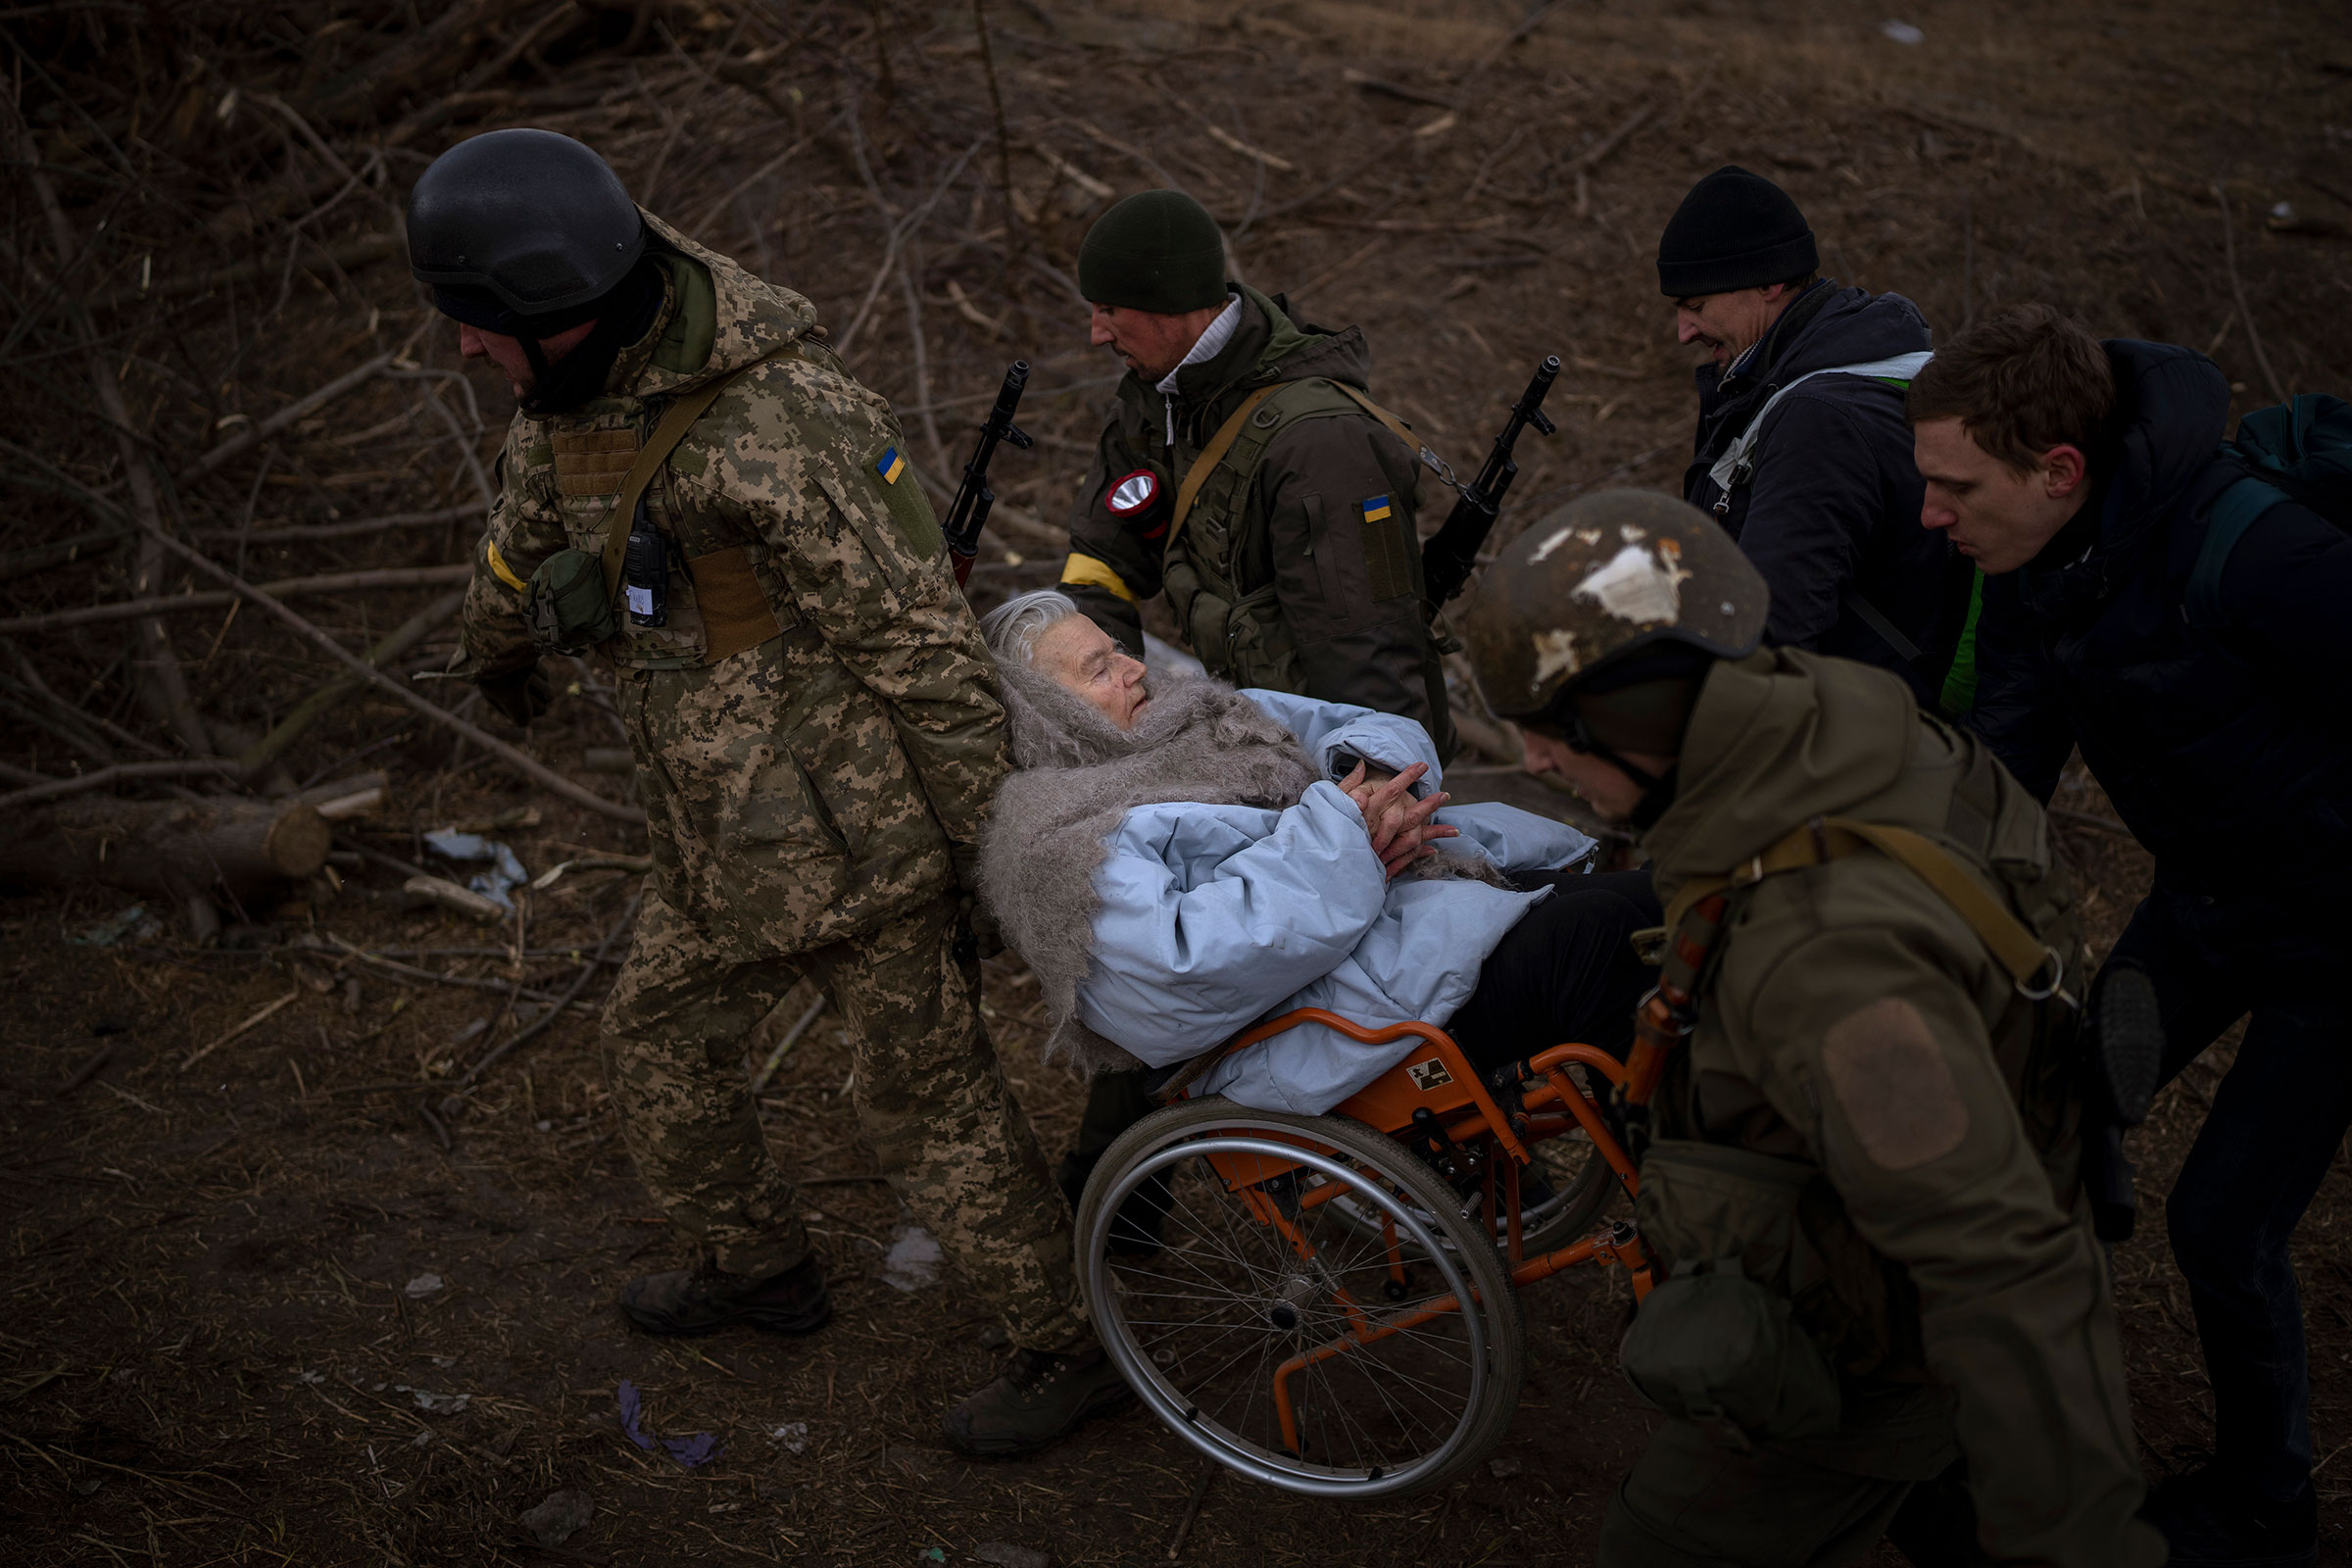 Ukrainian soldiers and militiamen carry a woman in a wheelchair as the artillery echoes nearby, while people flee Irpin on the outskirts of Kyiv on March 7.